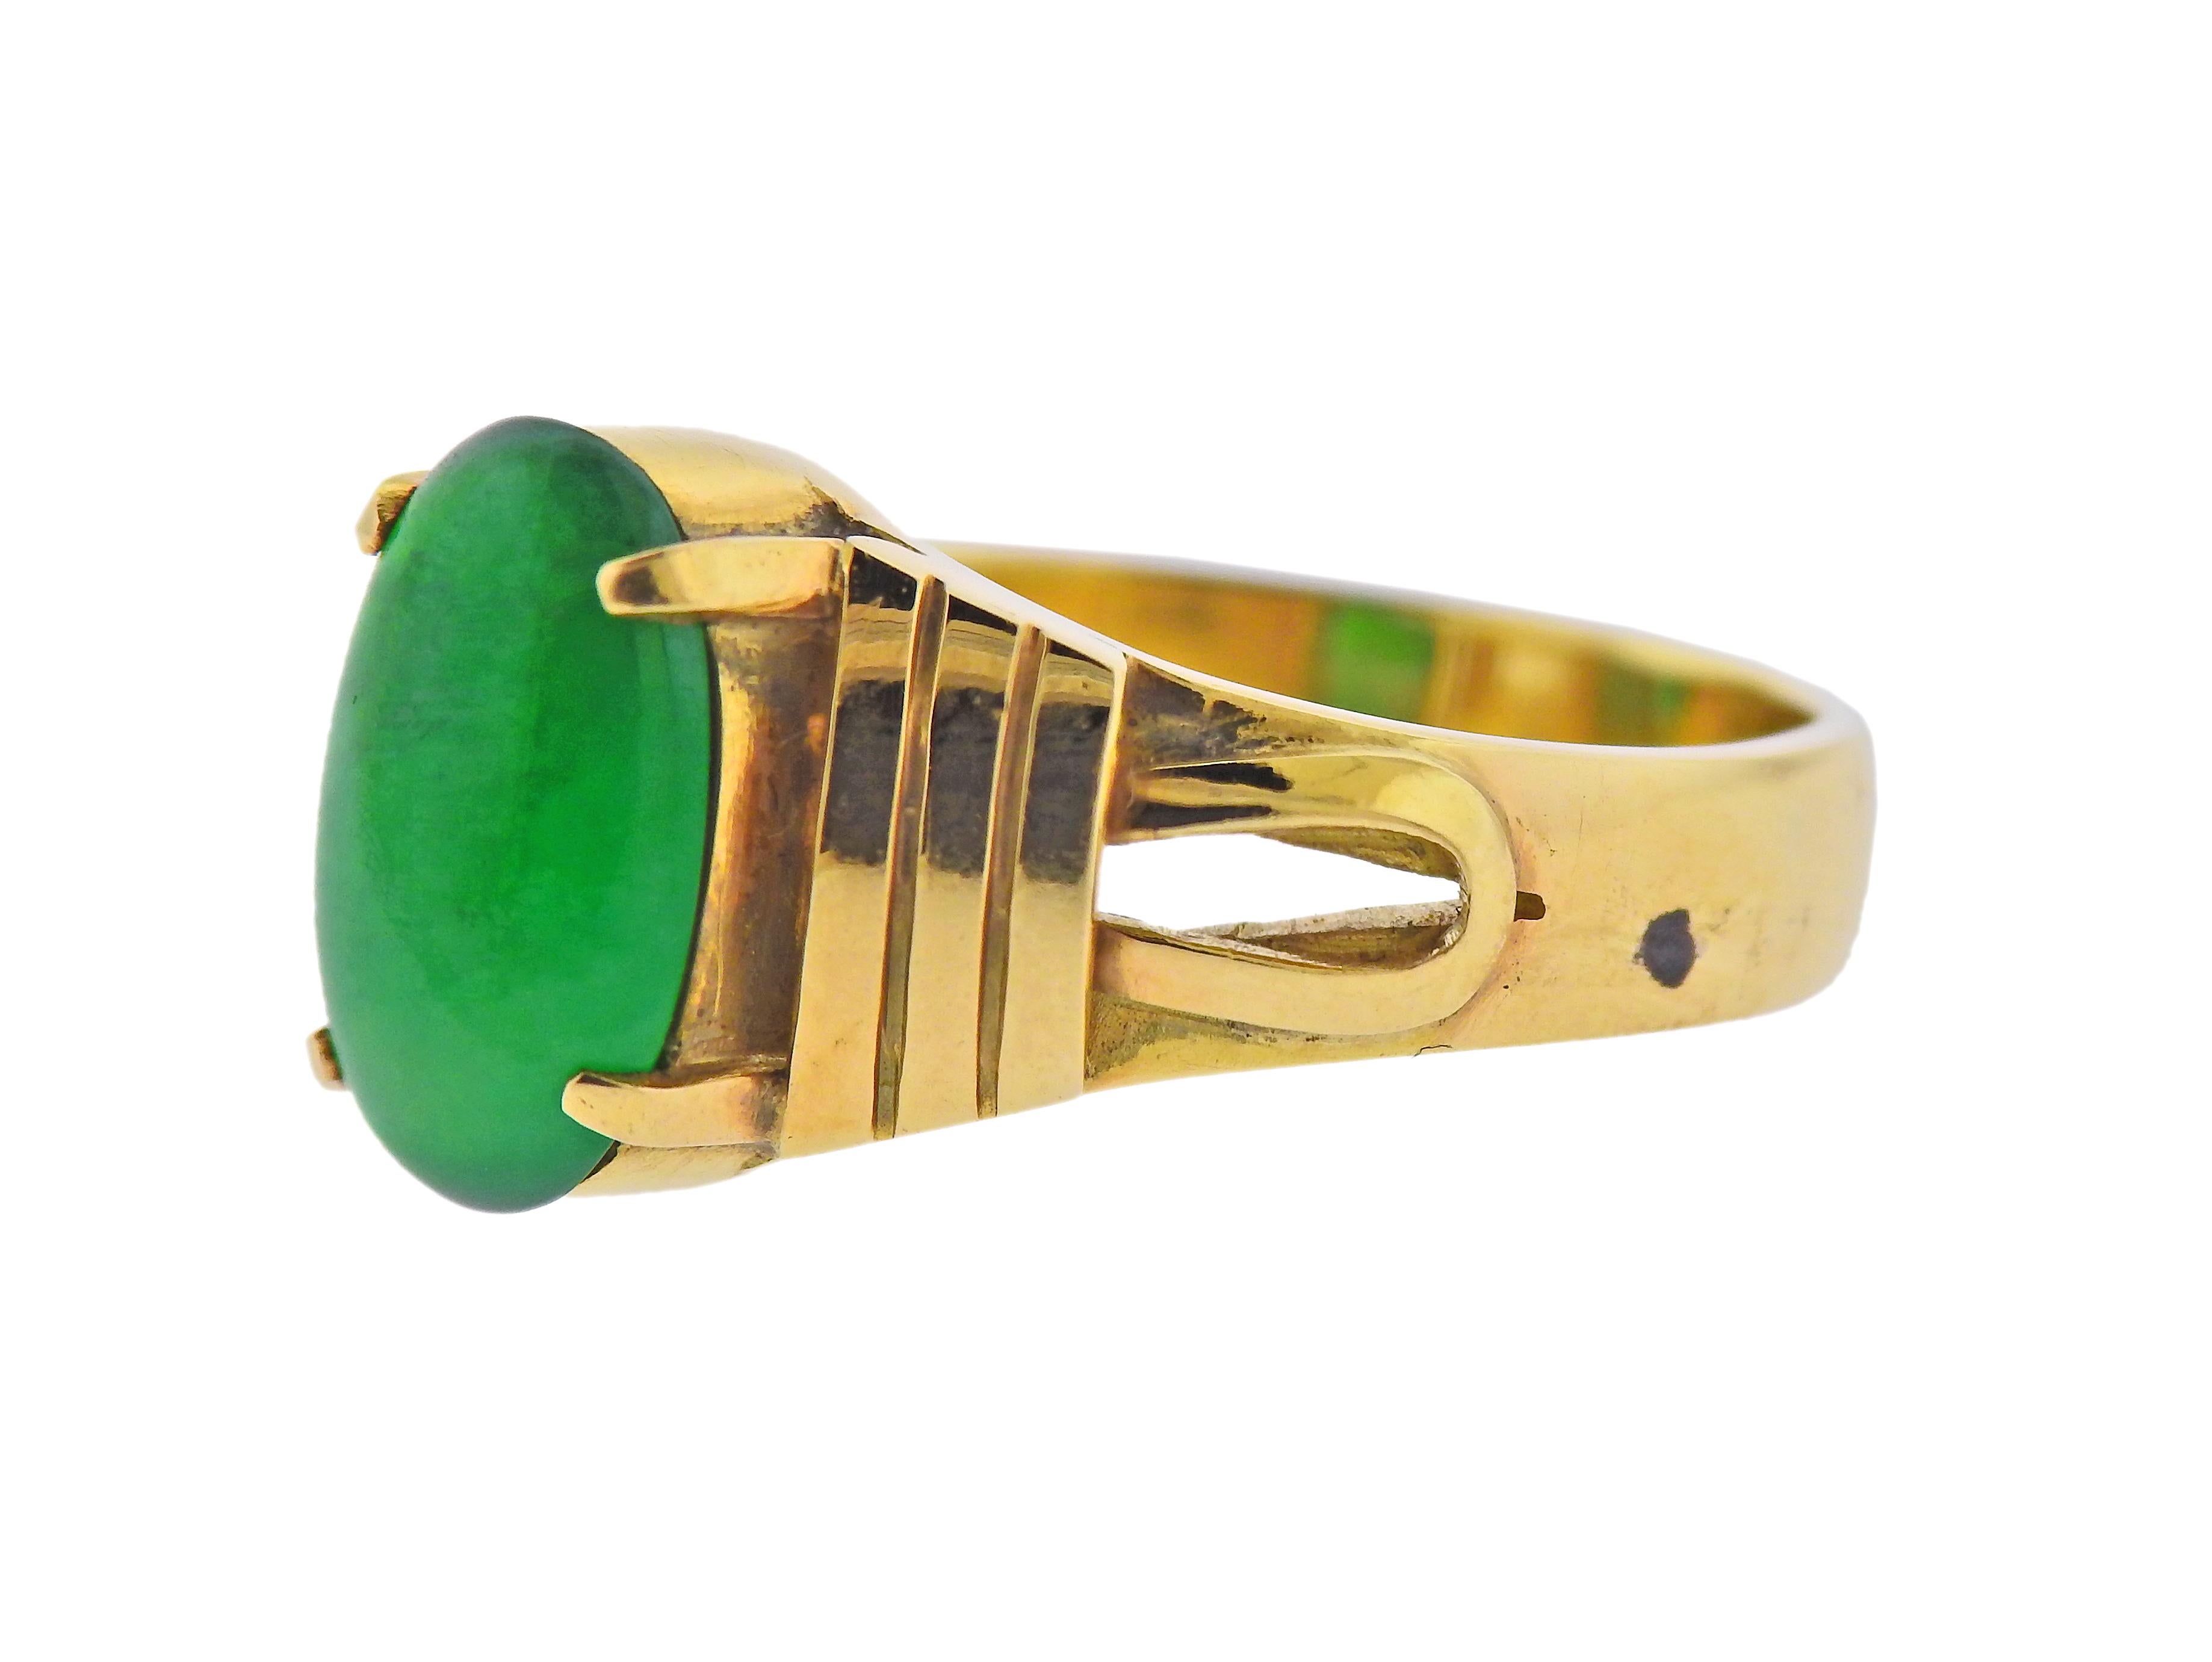 18k yellow gold ring with oval jade. Measuring approx. 12.3 x 7.7 x 3.1mm. Ring size - 9. Marked: 2 KM 90%. Weight - 7.3 grams.